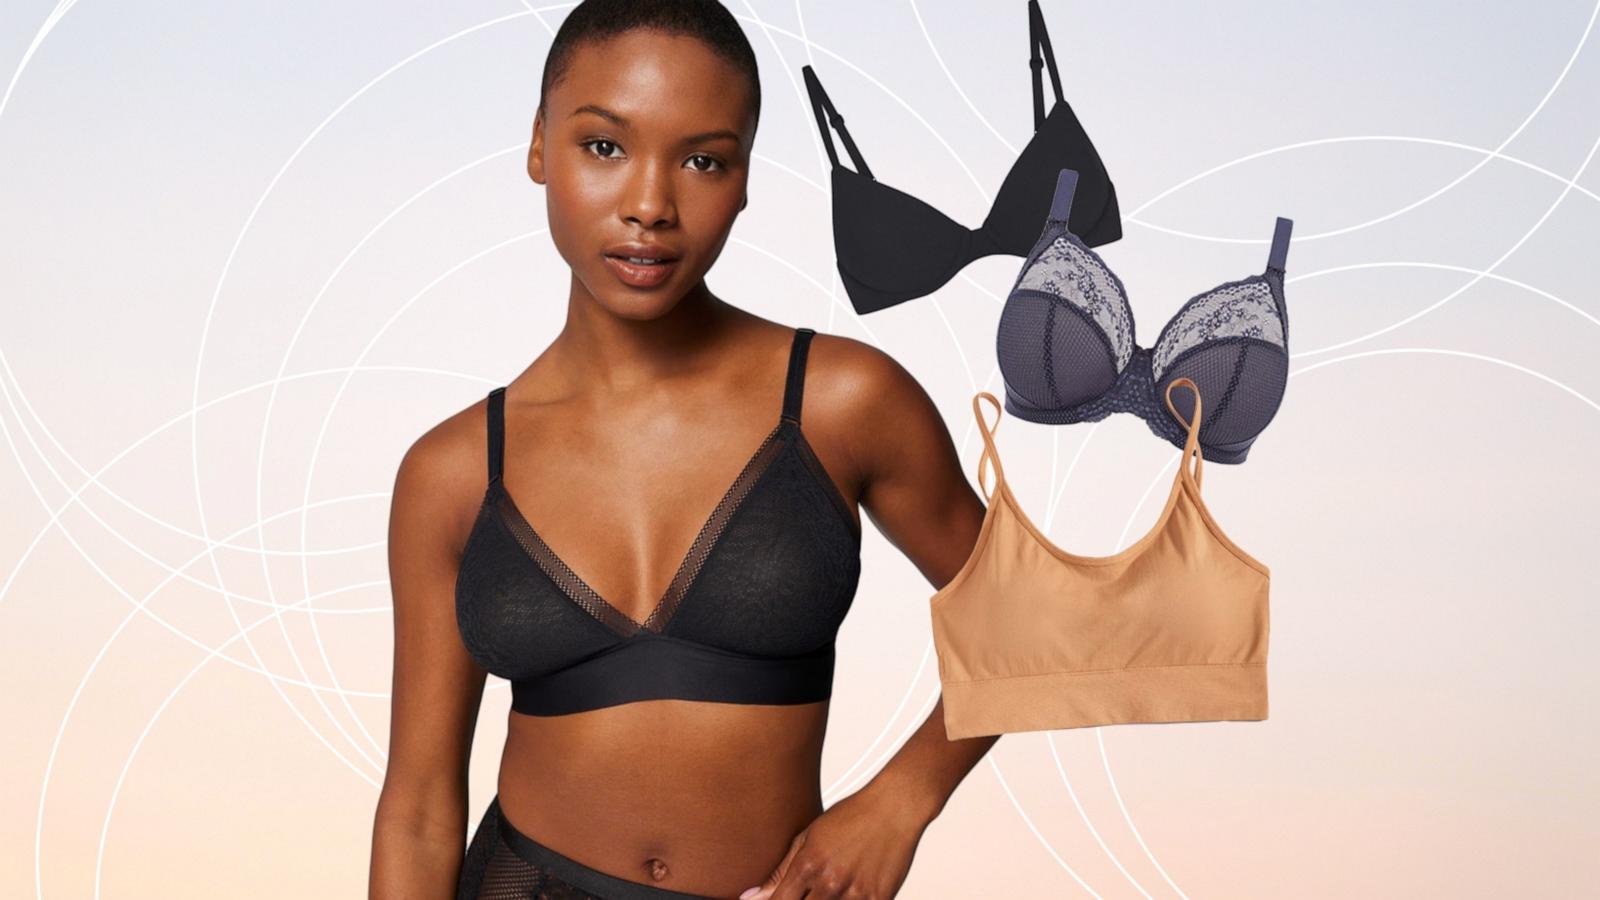 The art of creating bras in large sizes